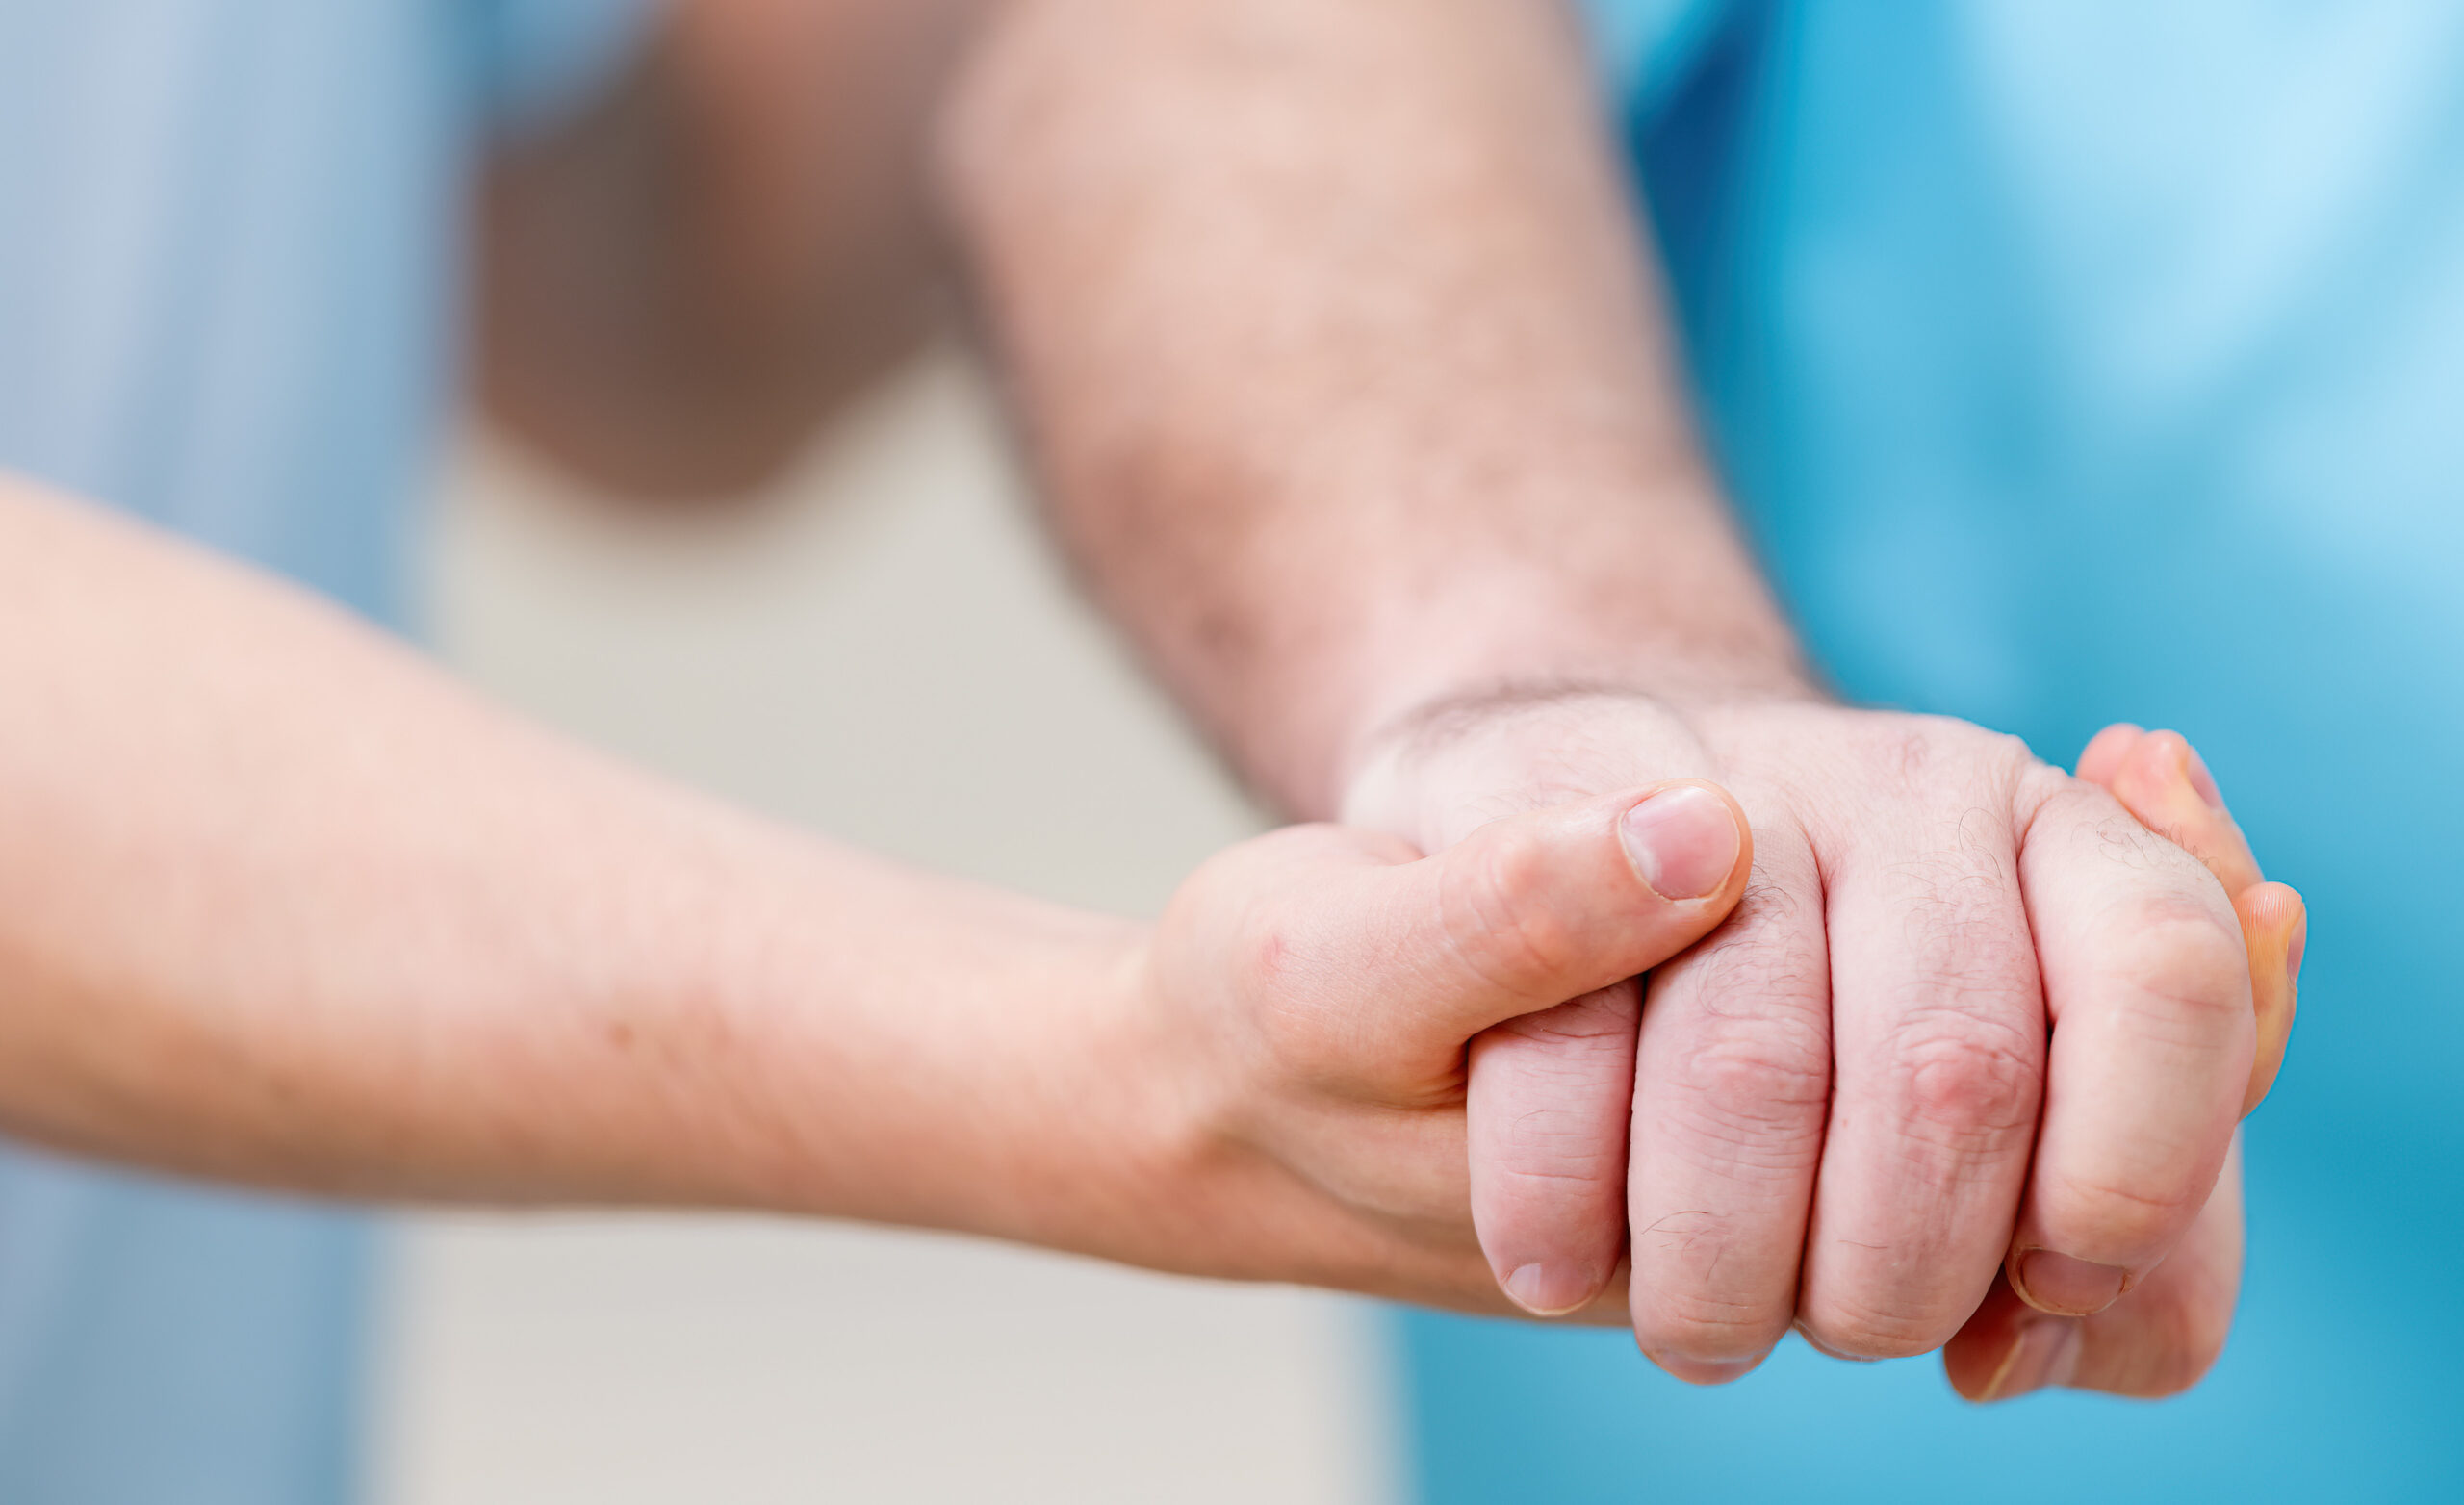 A close up image of a person's hand is reaching out and holding another person's hand to show support.